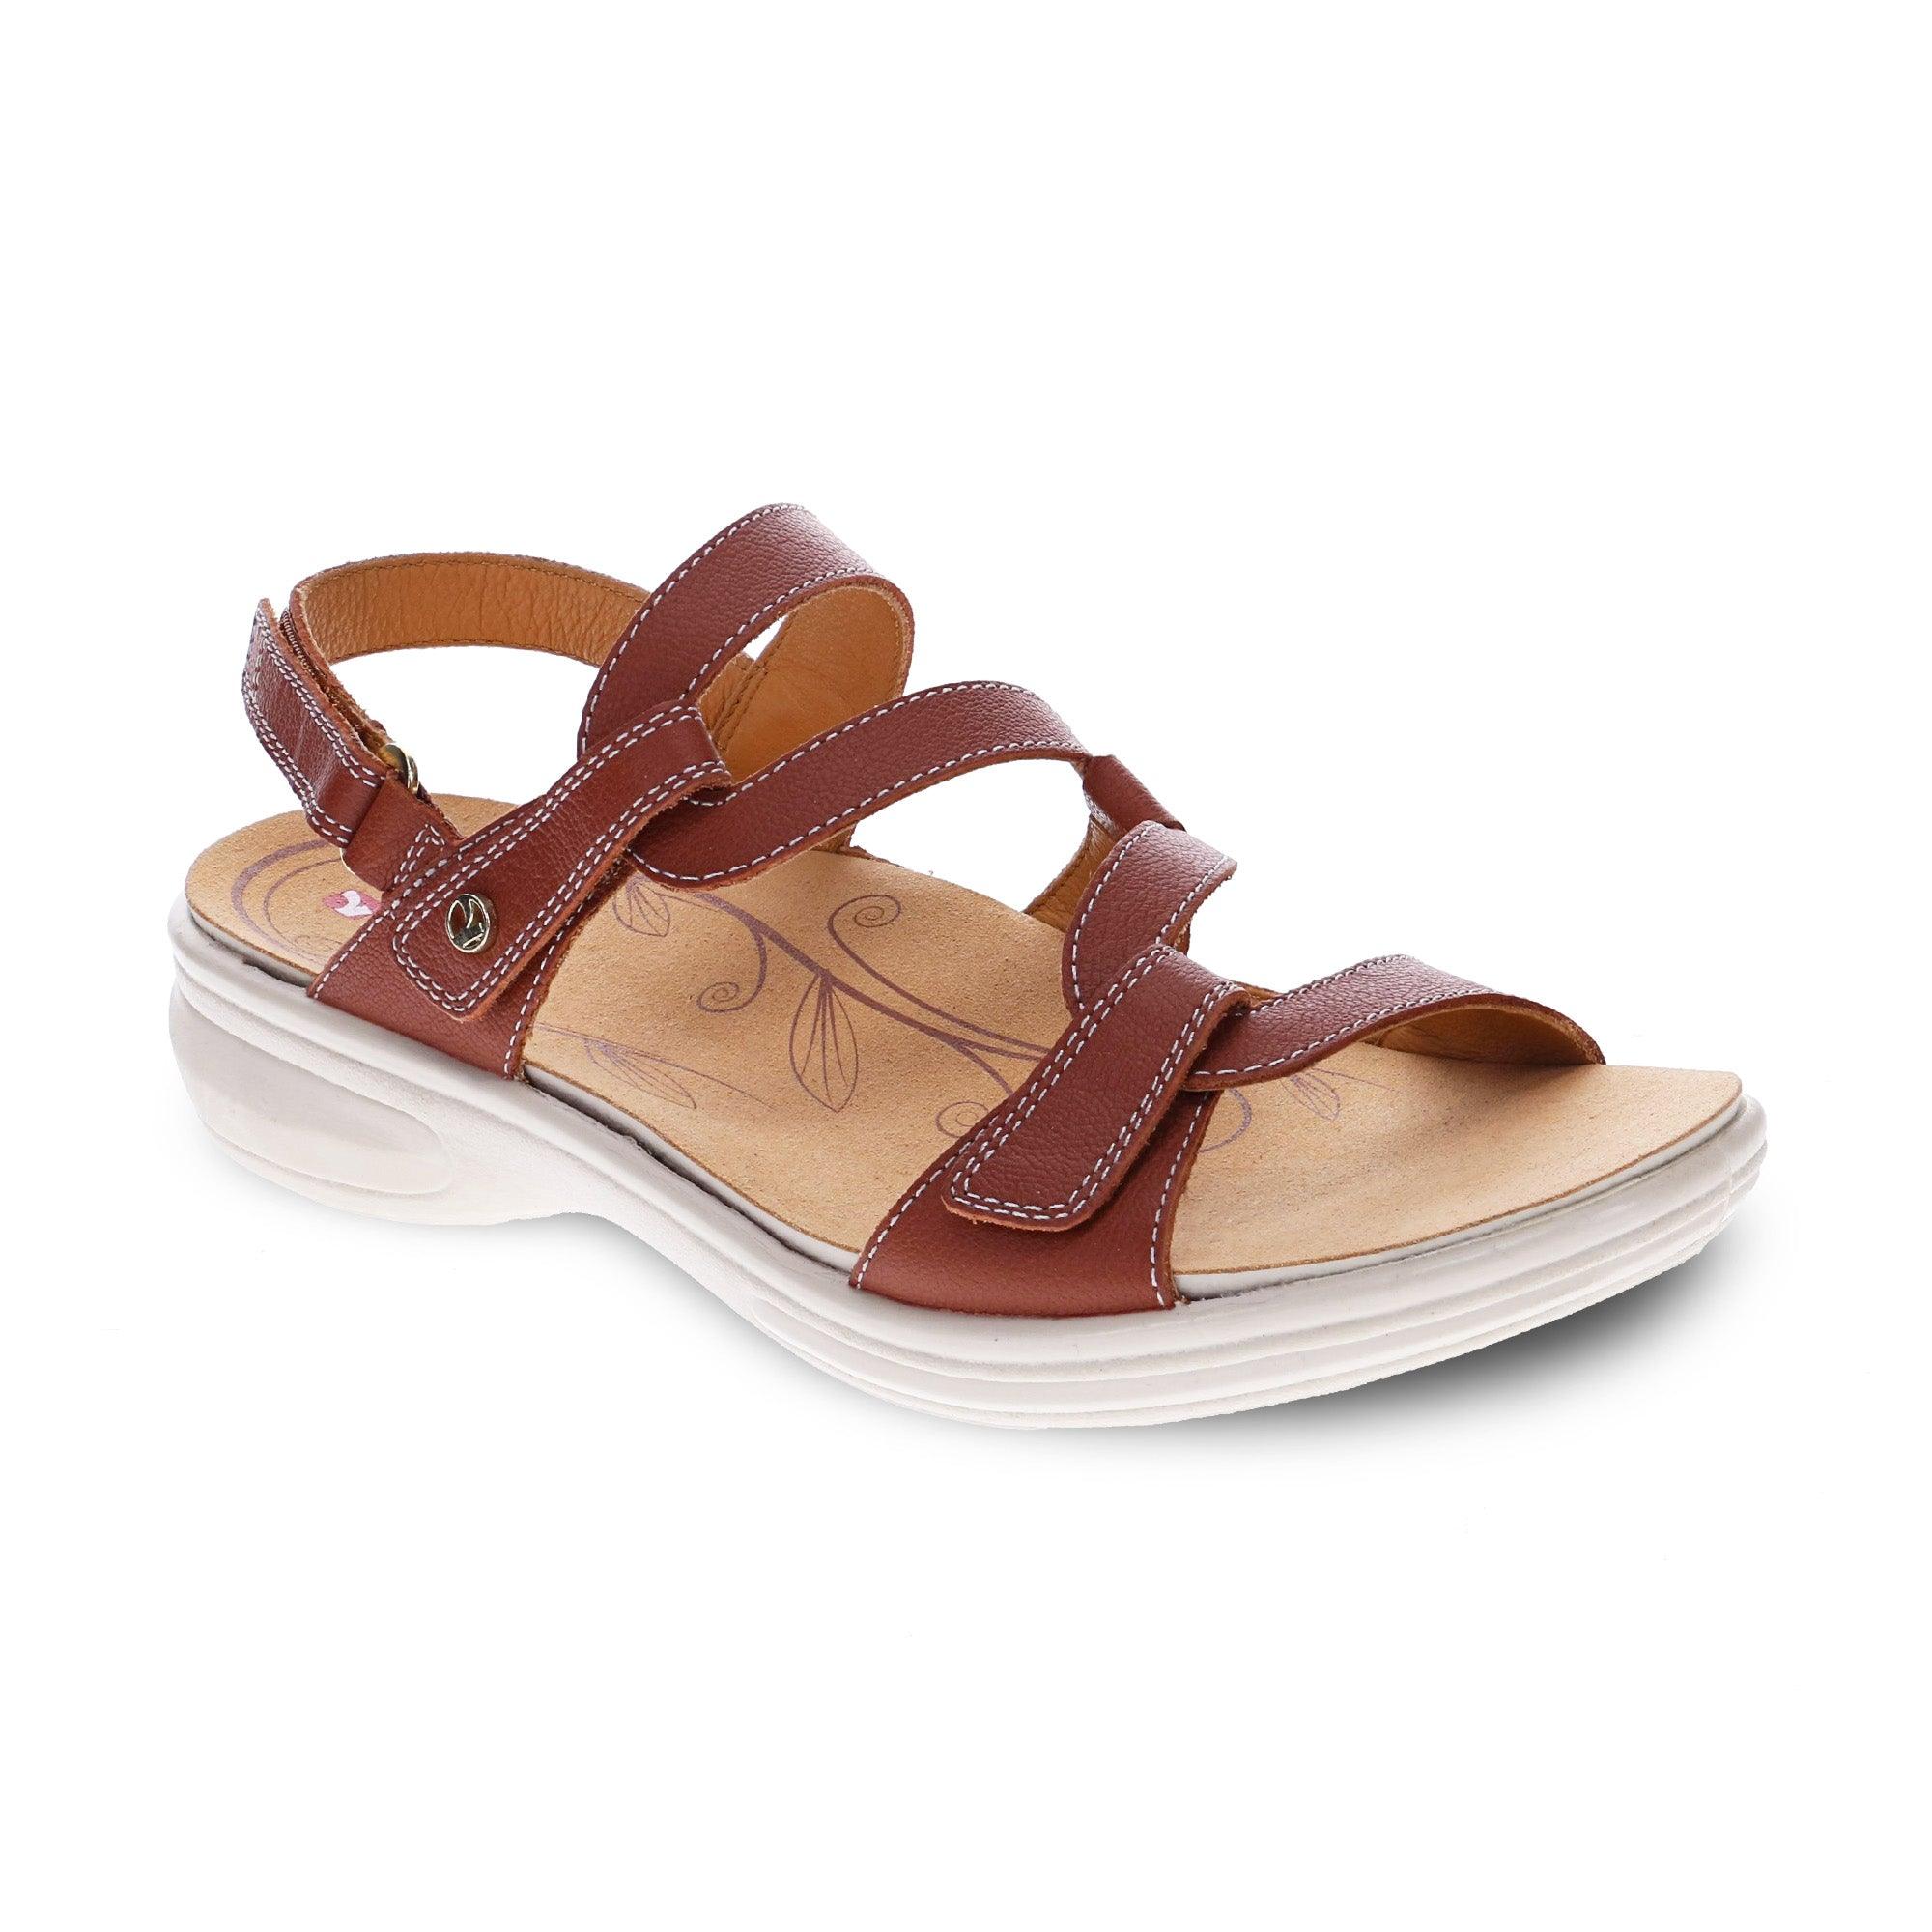 Emerald 3 Strap Leather Sandals - On Sale - Revere Shoes